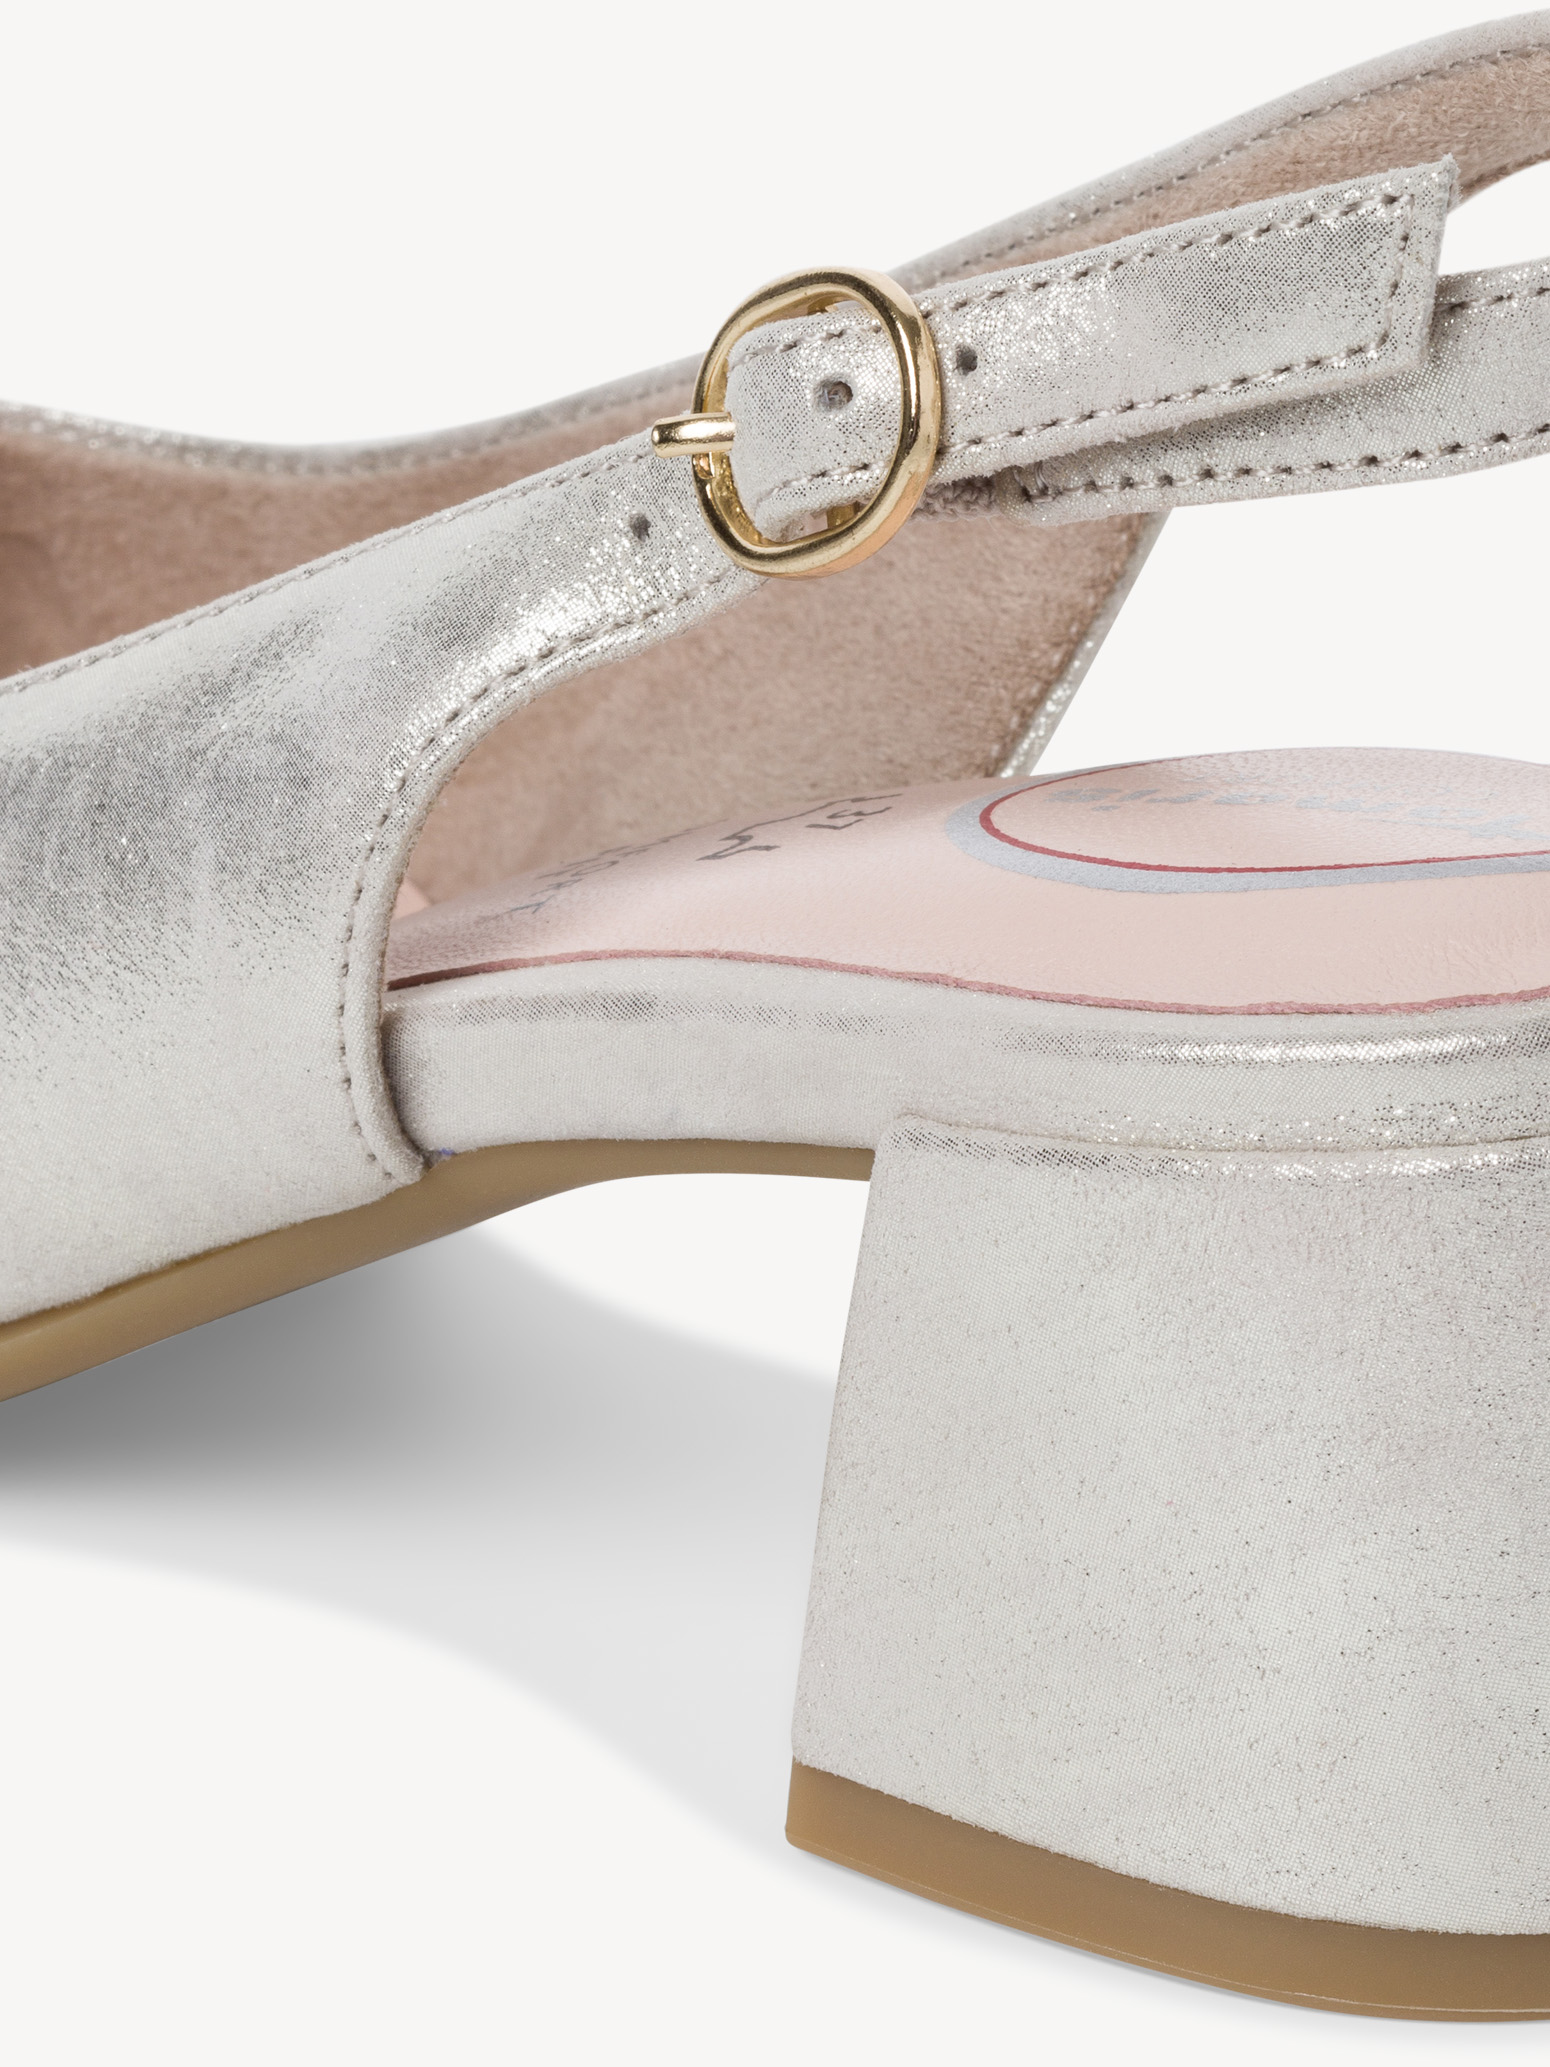 Leather sling pumps - metallic, CLOUDY GOLD, hi-res